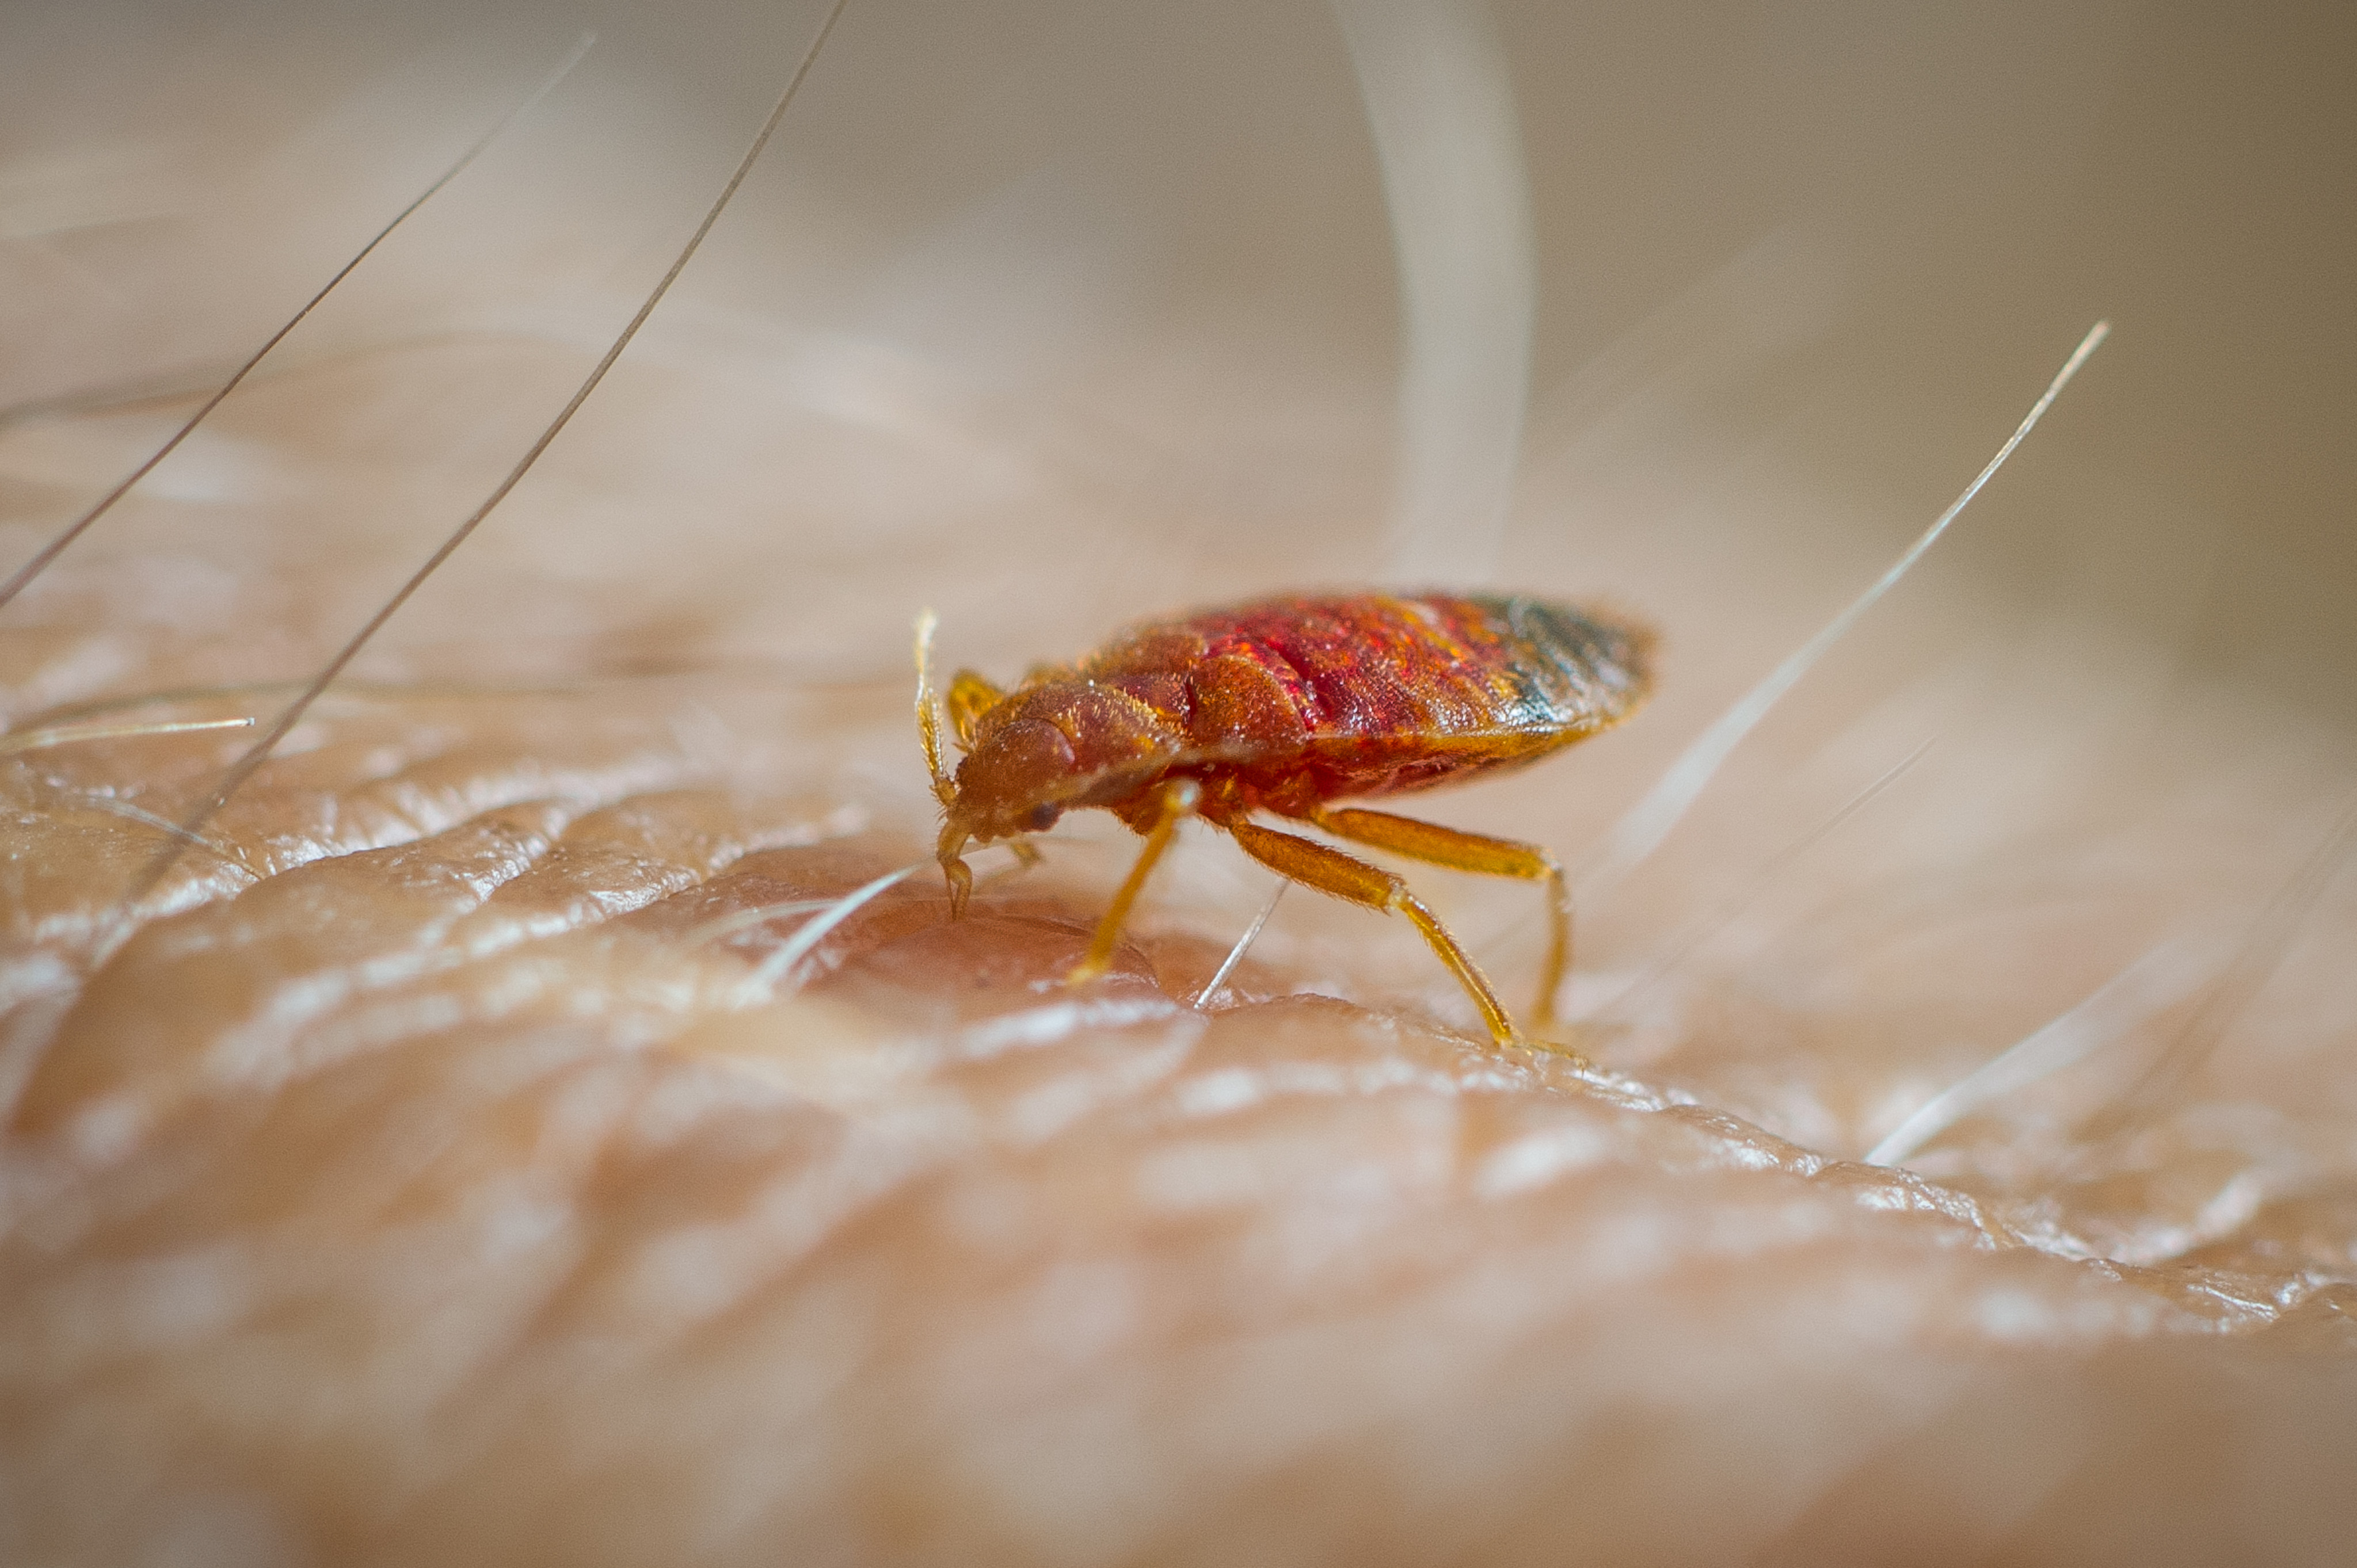 Bedbugs have appeared on international radar screens after large-scale outbreaks in South Korea, Paris and London as international travel picked up in the wake of the Covid-19 pandemic. Photo: Getty Images